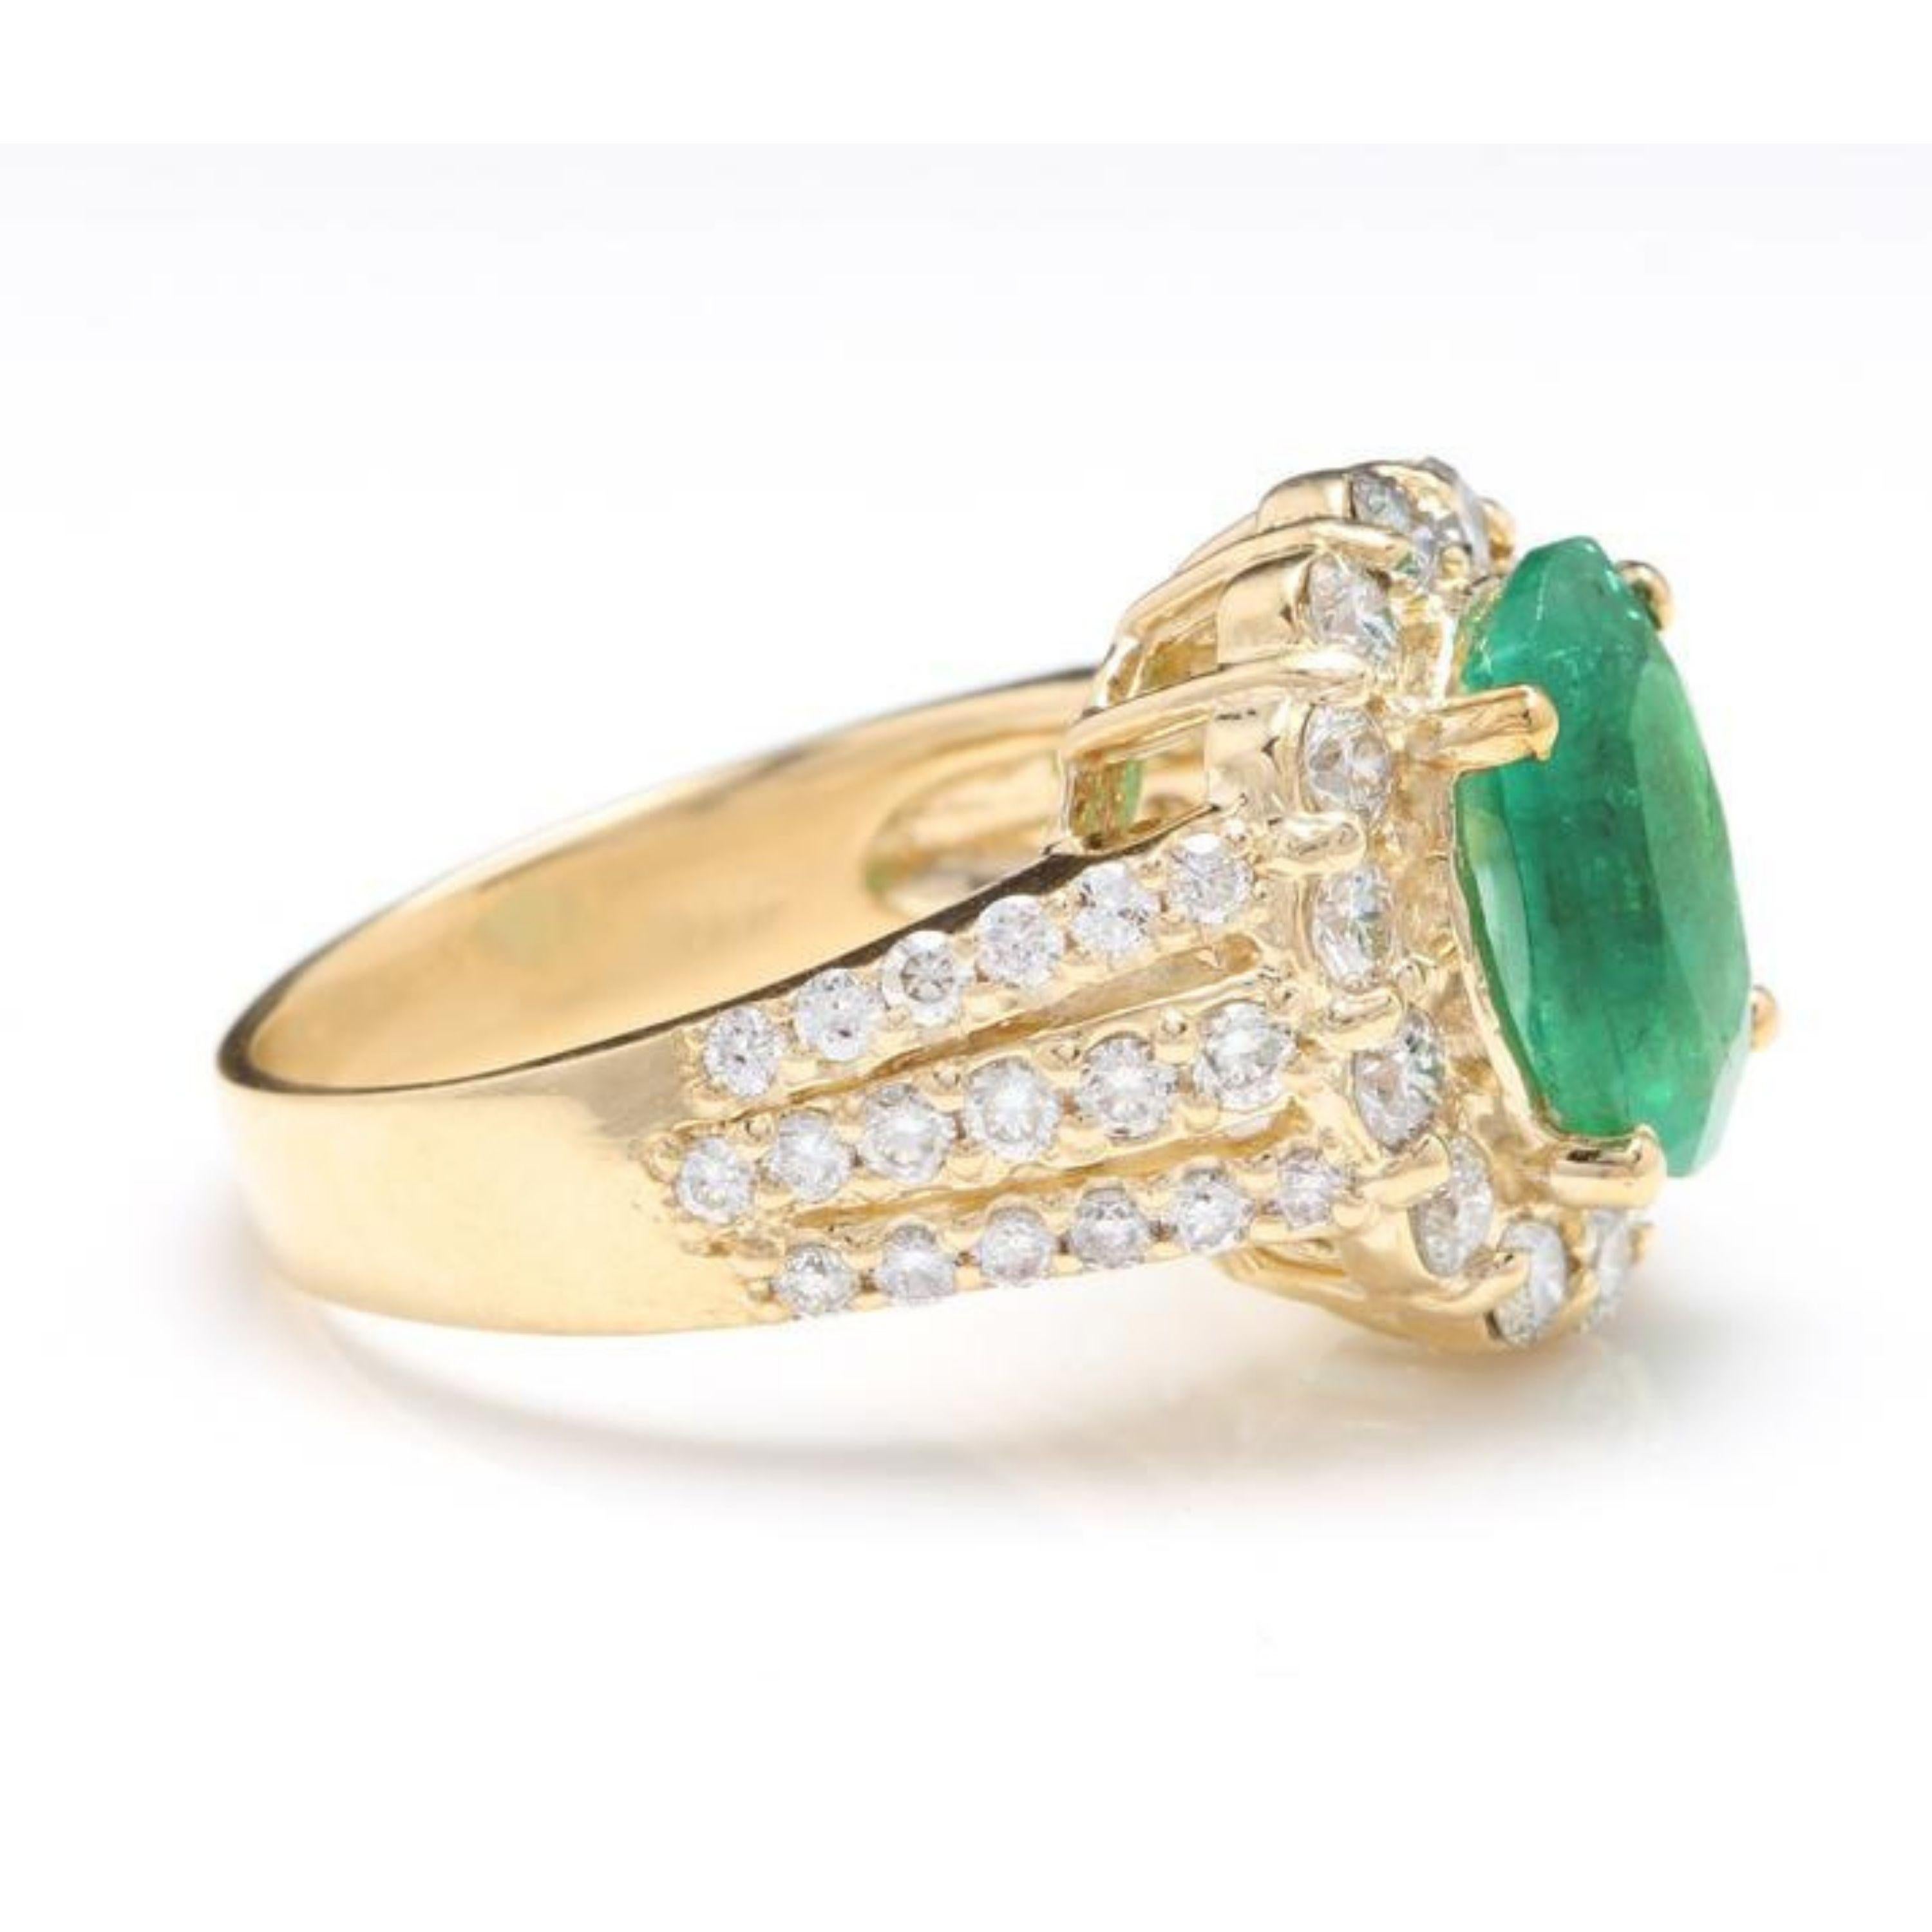 Emerald Cut 3.88 Carat Natural Emerald and Diamond 14 Karat Solid Yellow Gold Ring For Sale